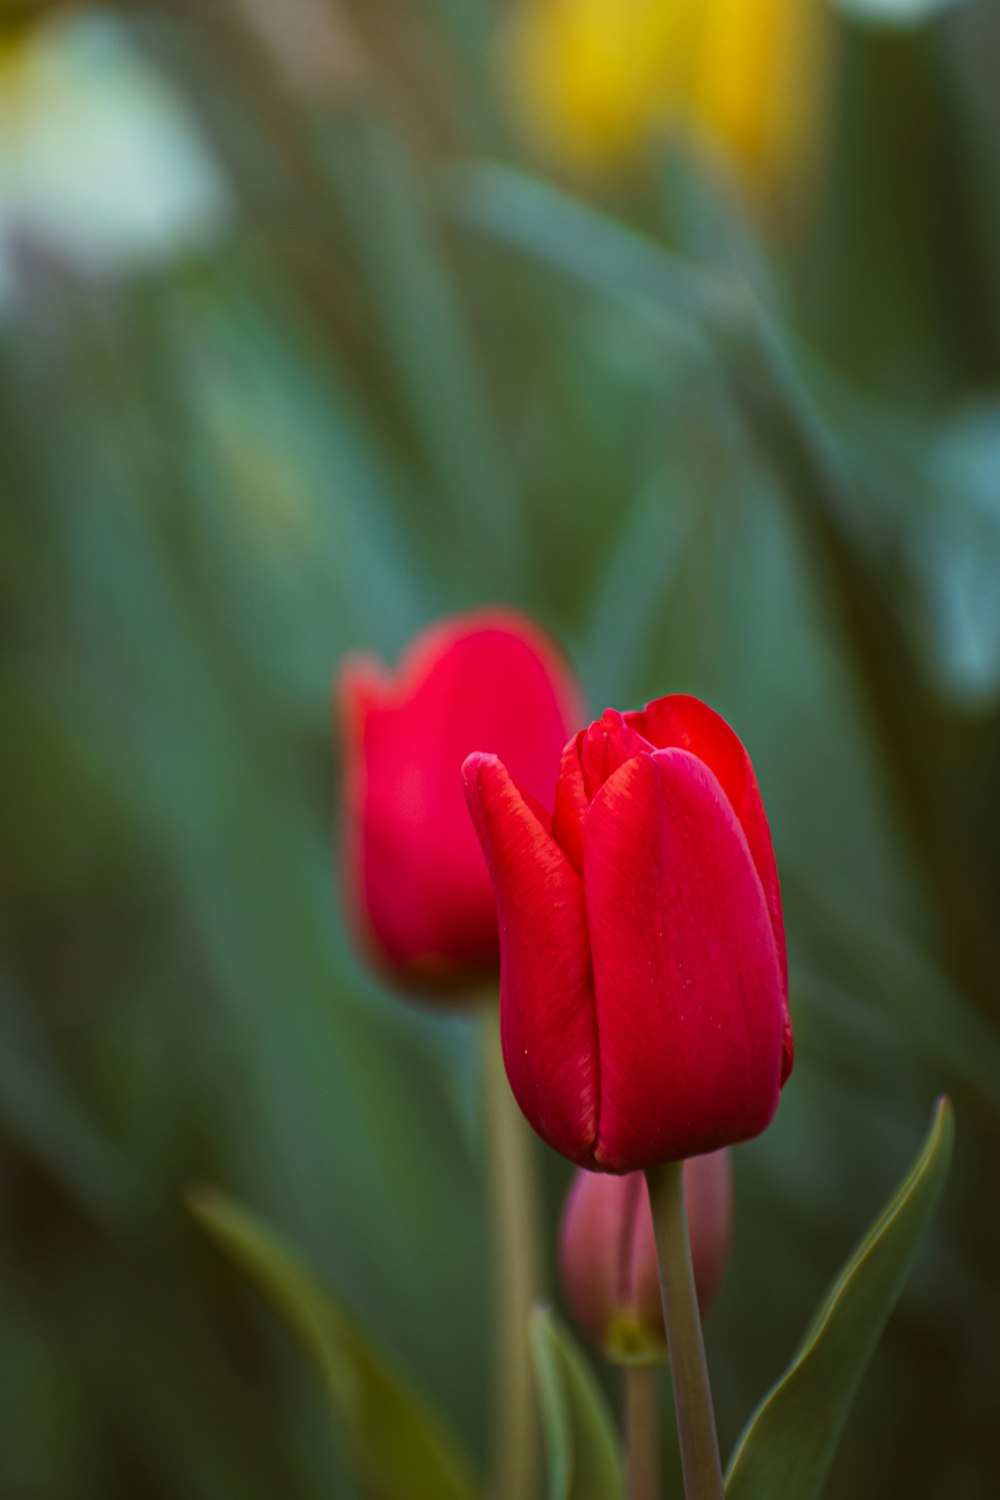 two red tulips with green leaves in the background